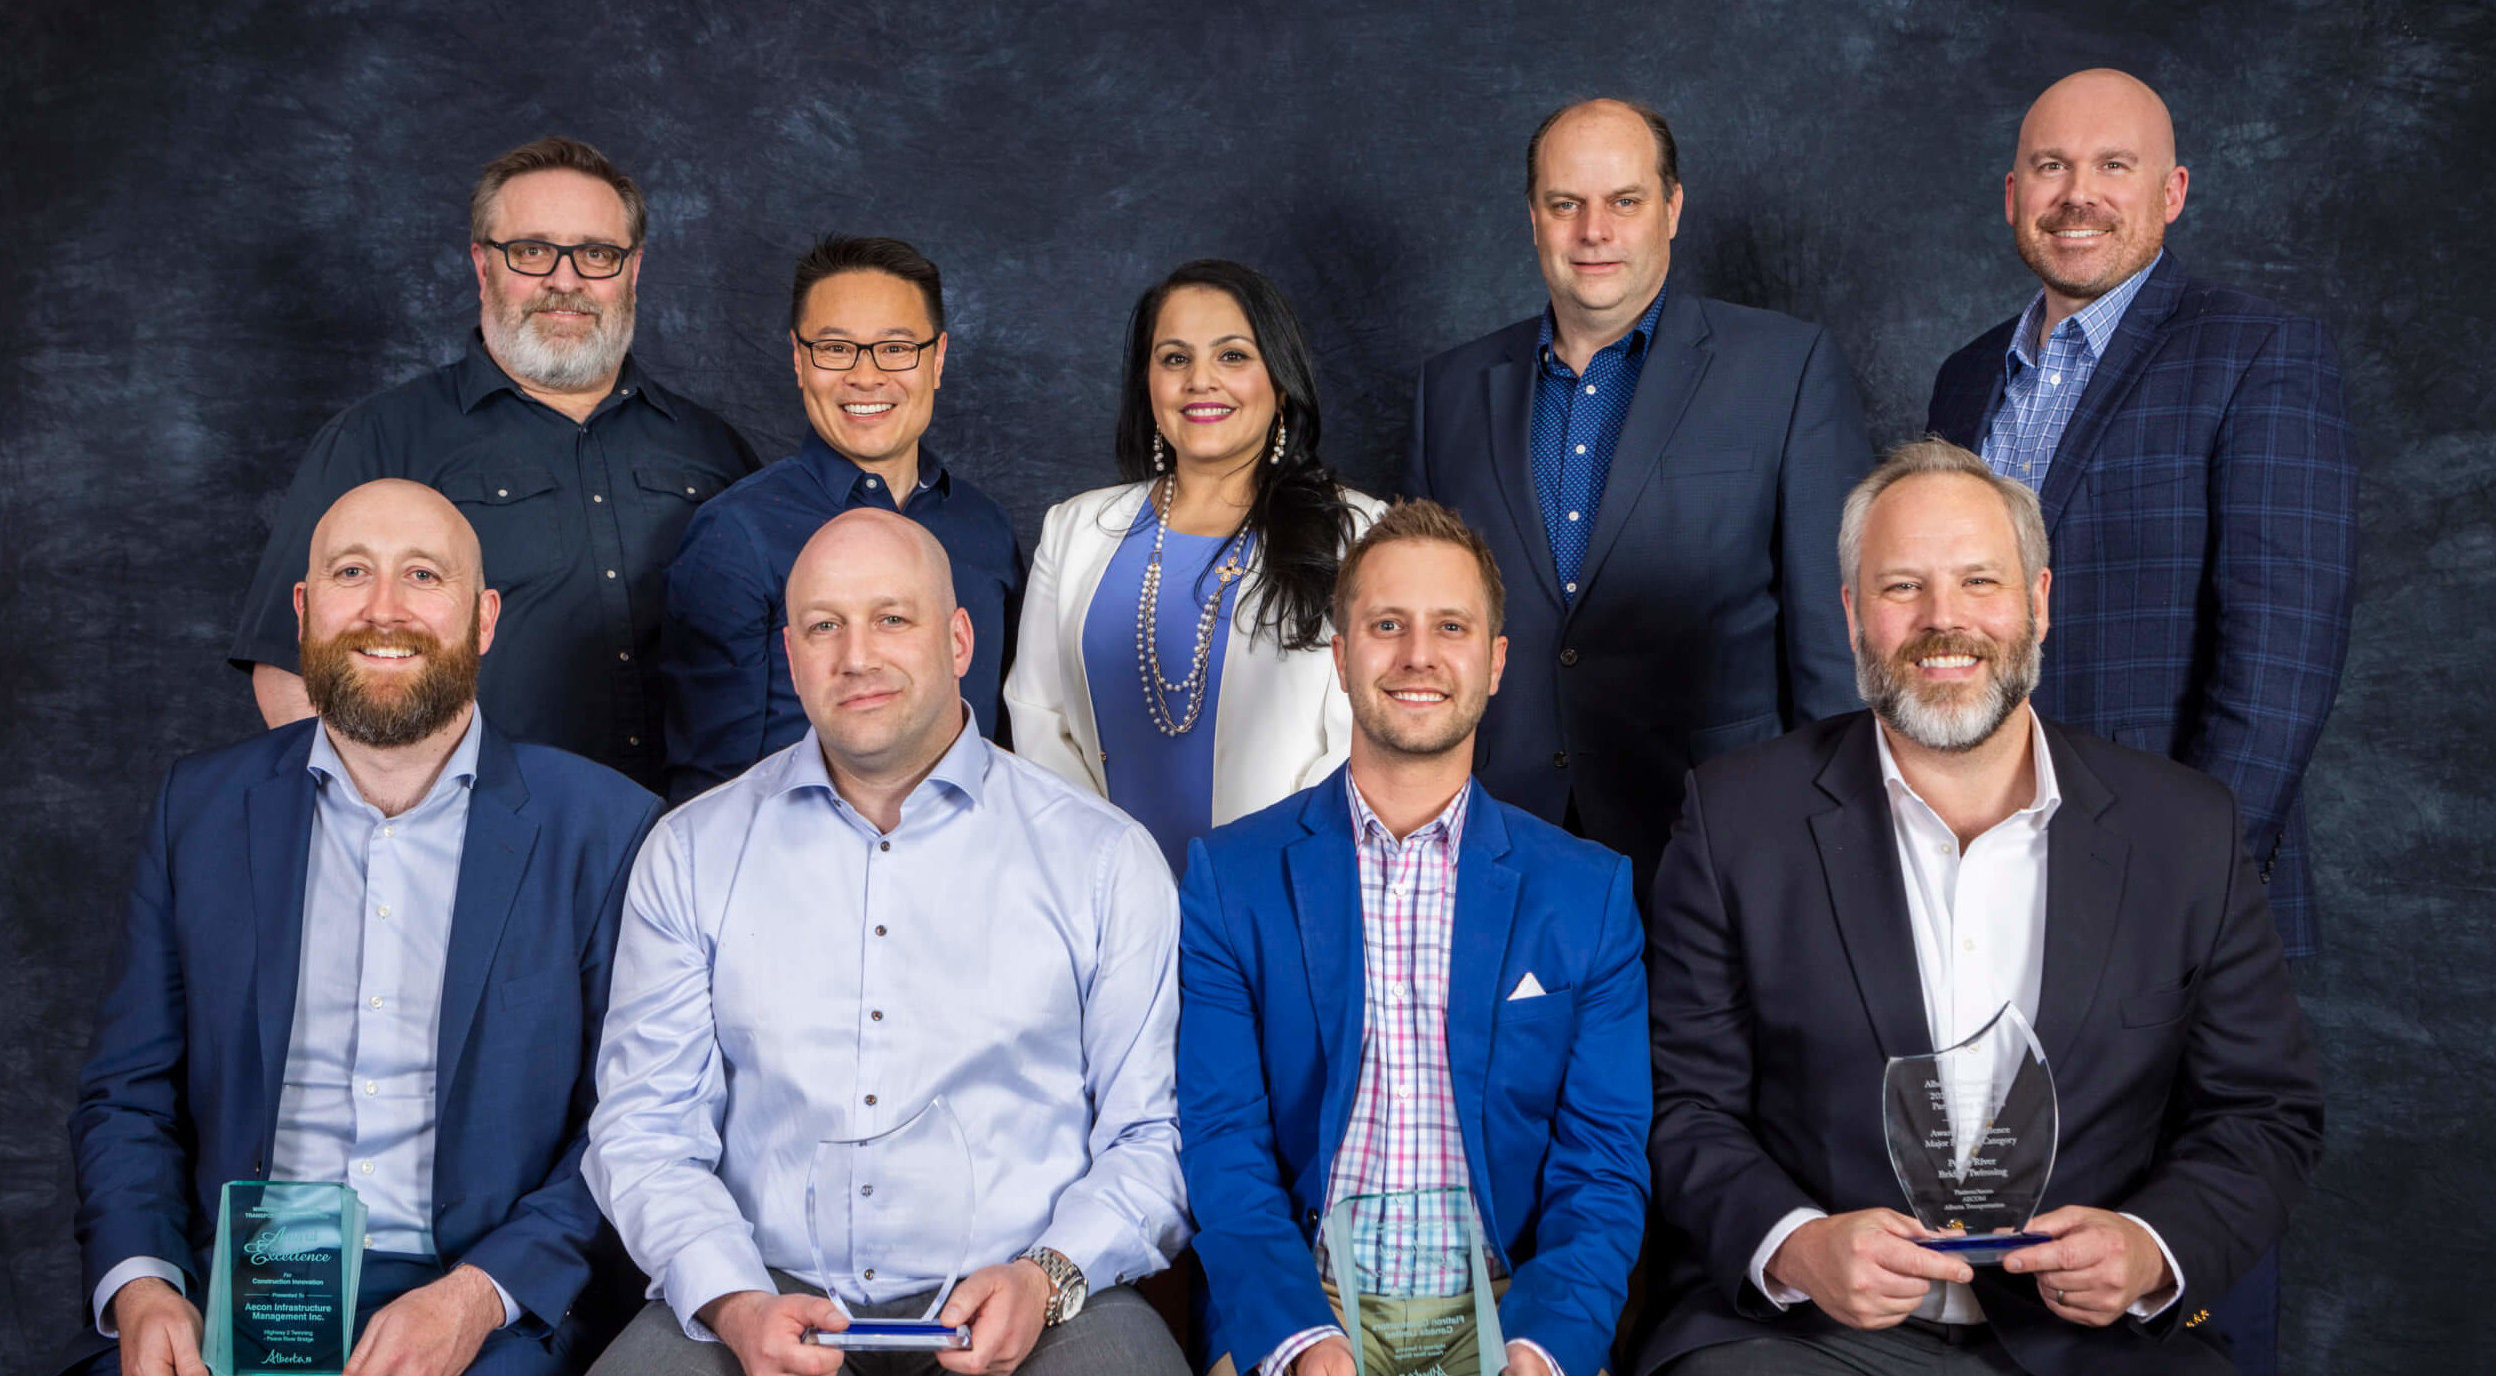 Flatiron-Aecon Joint Venture was awarded the 2021 Alberta Transportation (AT) Construction Partnering Award in the Major Projects Category.